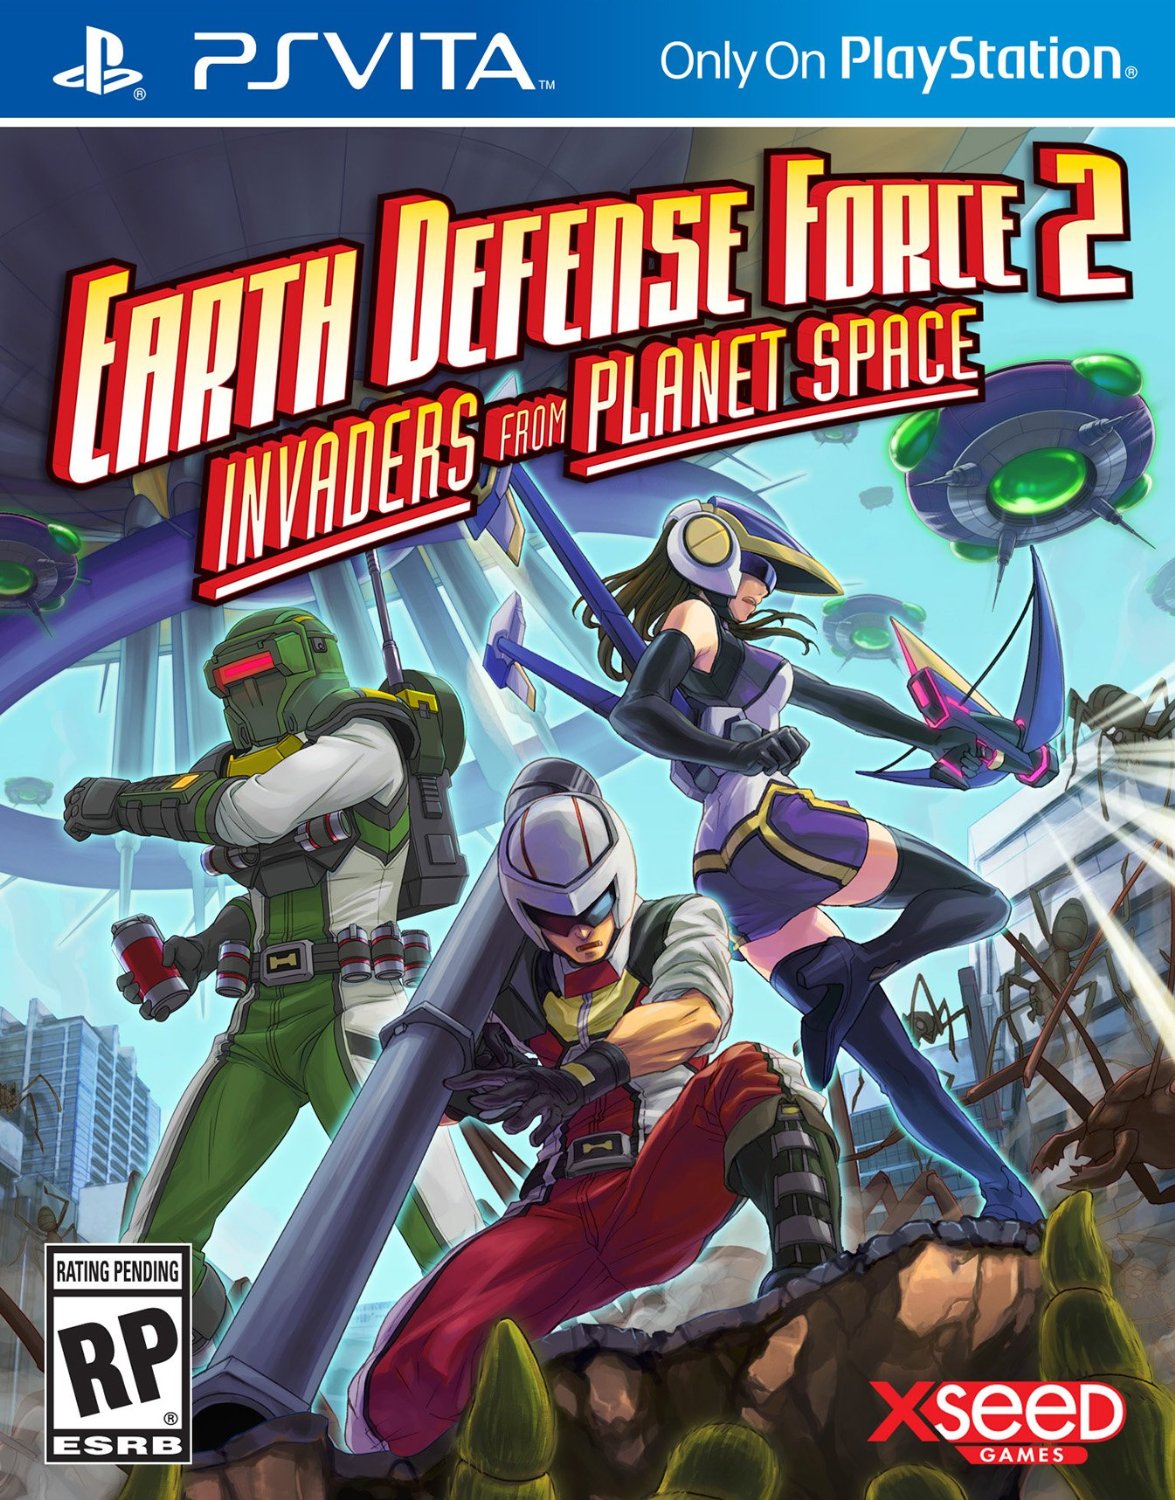 Boîte de Earth Defense Force 2 : Invaders from Planet Space